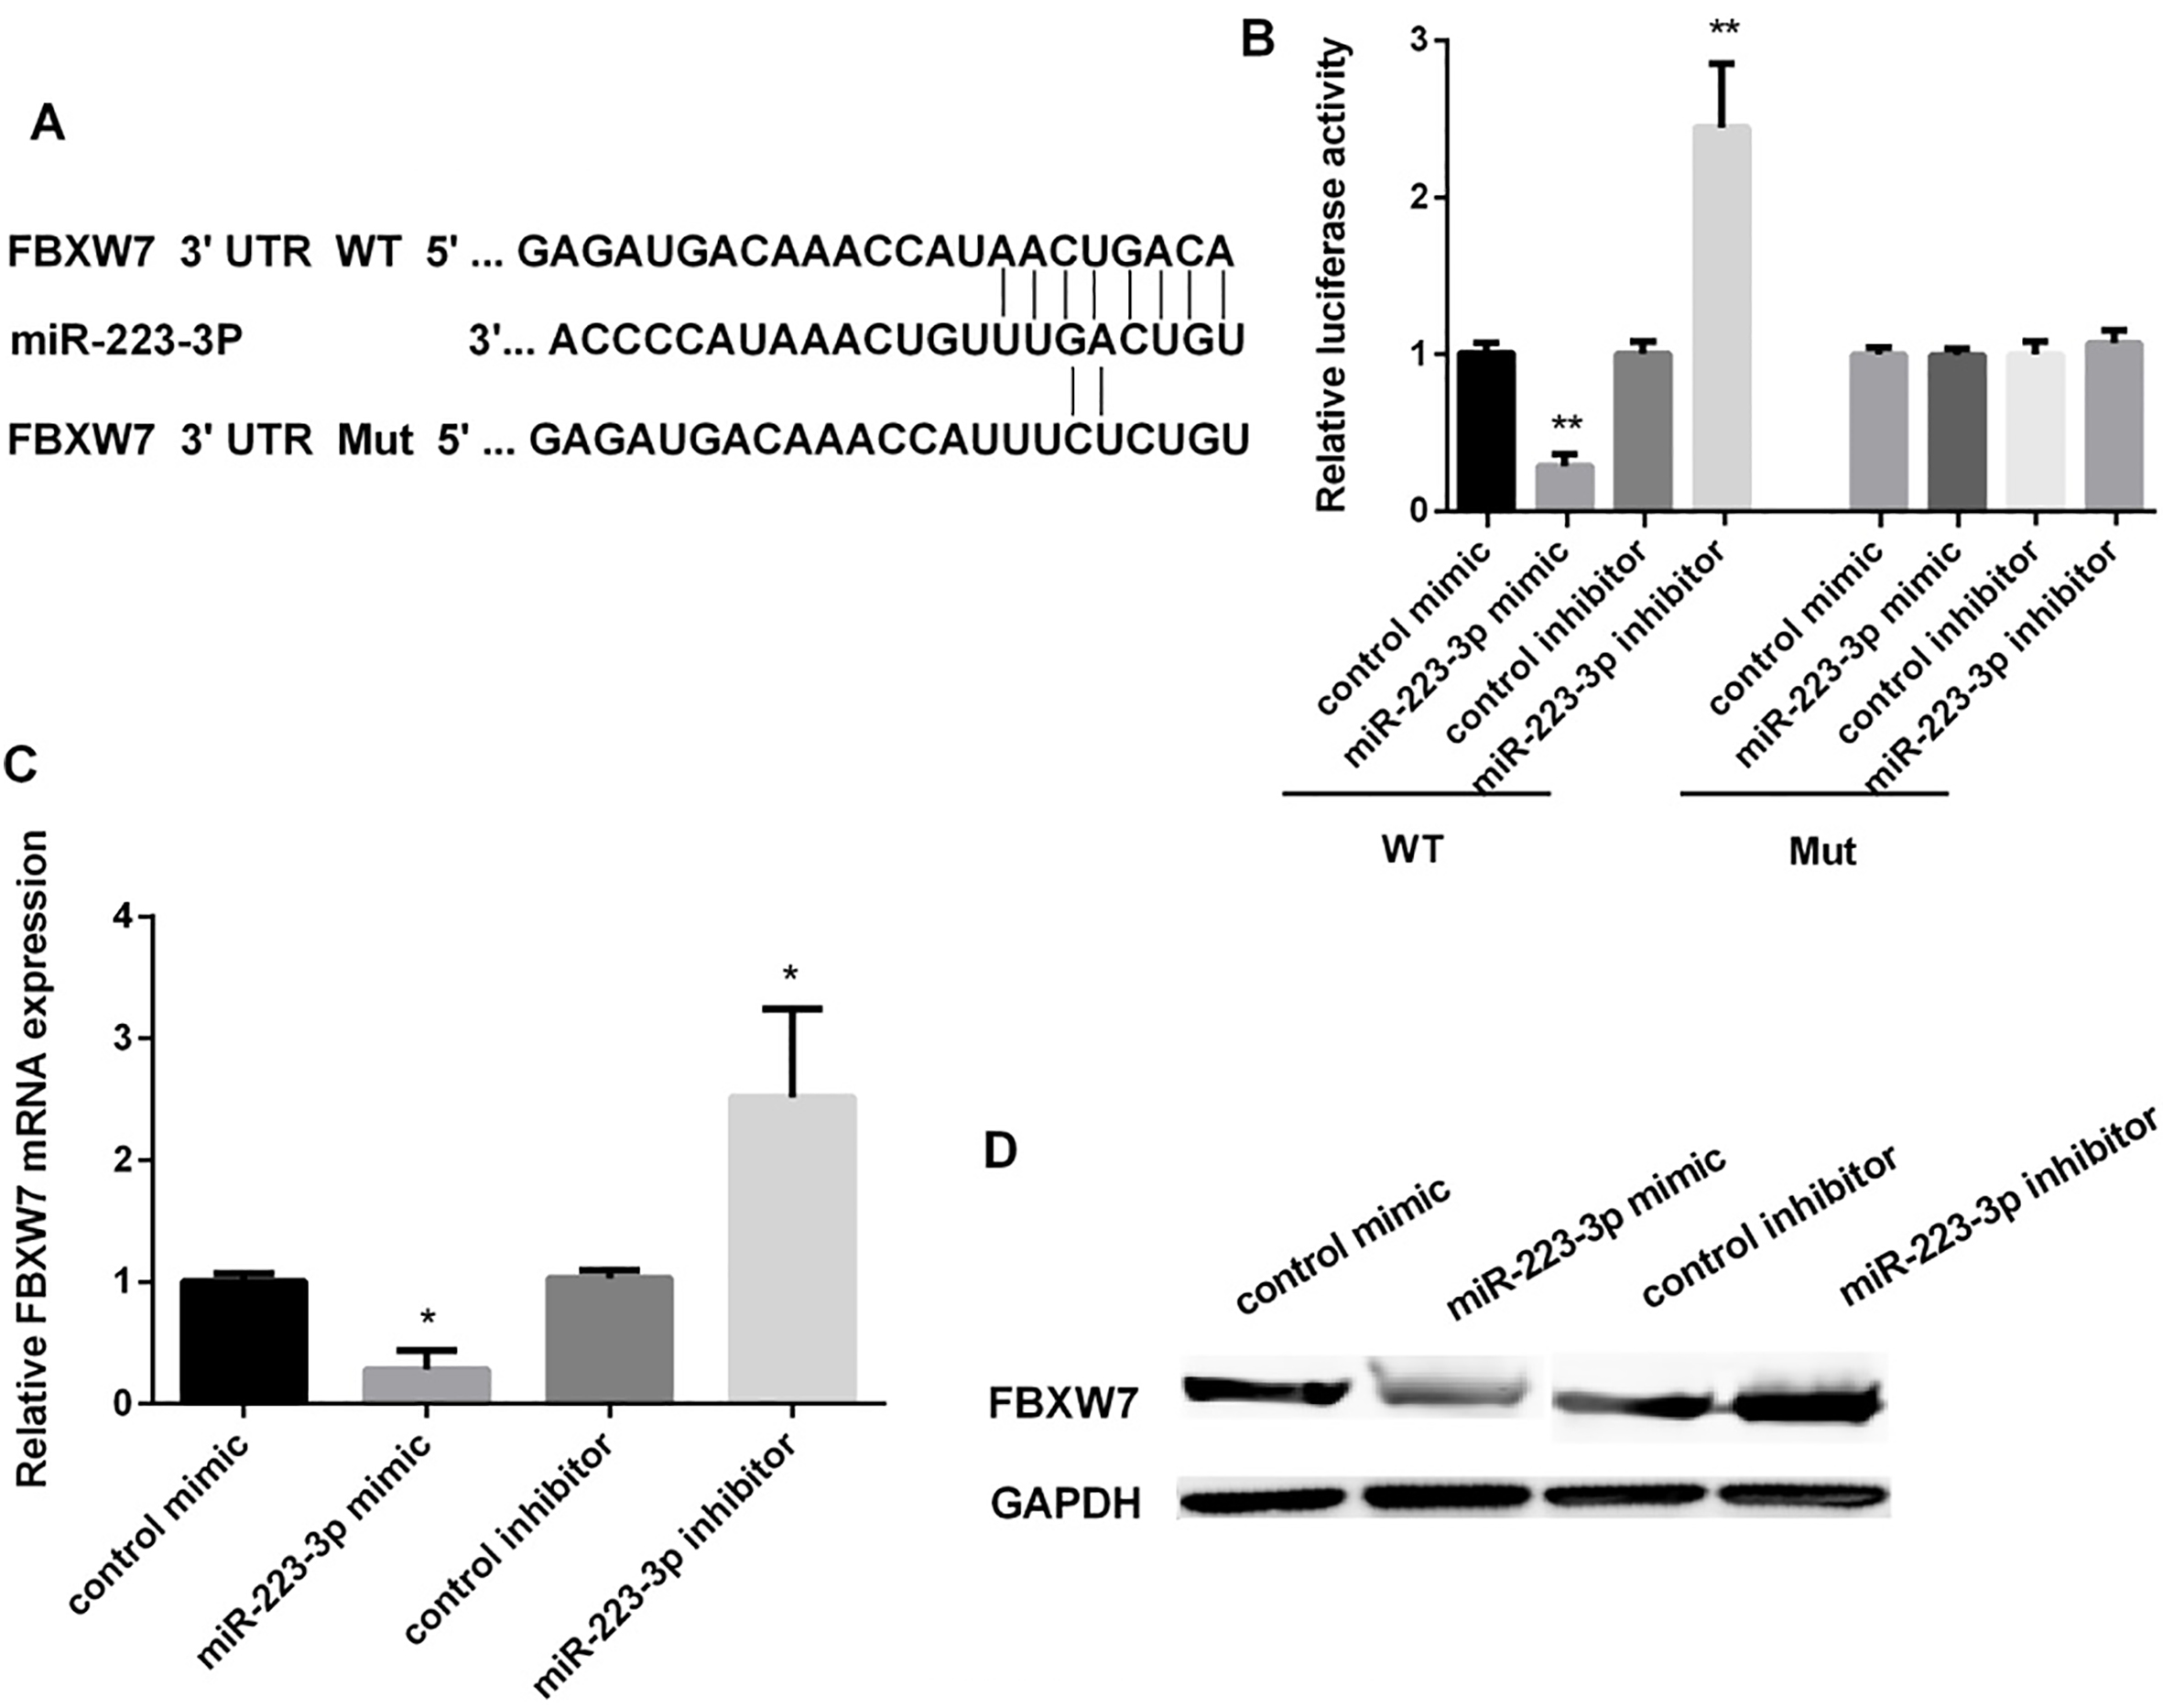 FBXW7 as a target gene of miR-223 in regulating of OSCC cells. (A) The predicted sites of miR-223 in the 3’UTR of FBXW7. Between the 3’-UTR of FBXW7 and the complementary sites for the seed regions in miR-223 generated mutation. (B) Detection of the luciferase activity in OECM1 cells after transfected with miR-223 mimic/inhibitor (P**< 0.01). (C and D) Detection of FBXW7 mRNA level and protein level in OECM1 cells after transfected with control mimic/inhibitor or miR-223 mimic/inhibitor by qRT-PCR (P*< 0.05). These experiments were repeated three times.